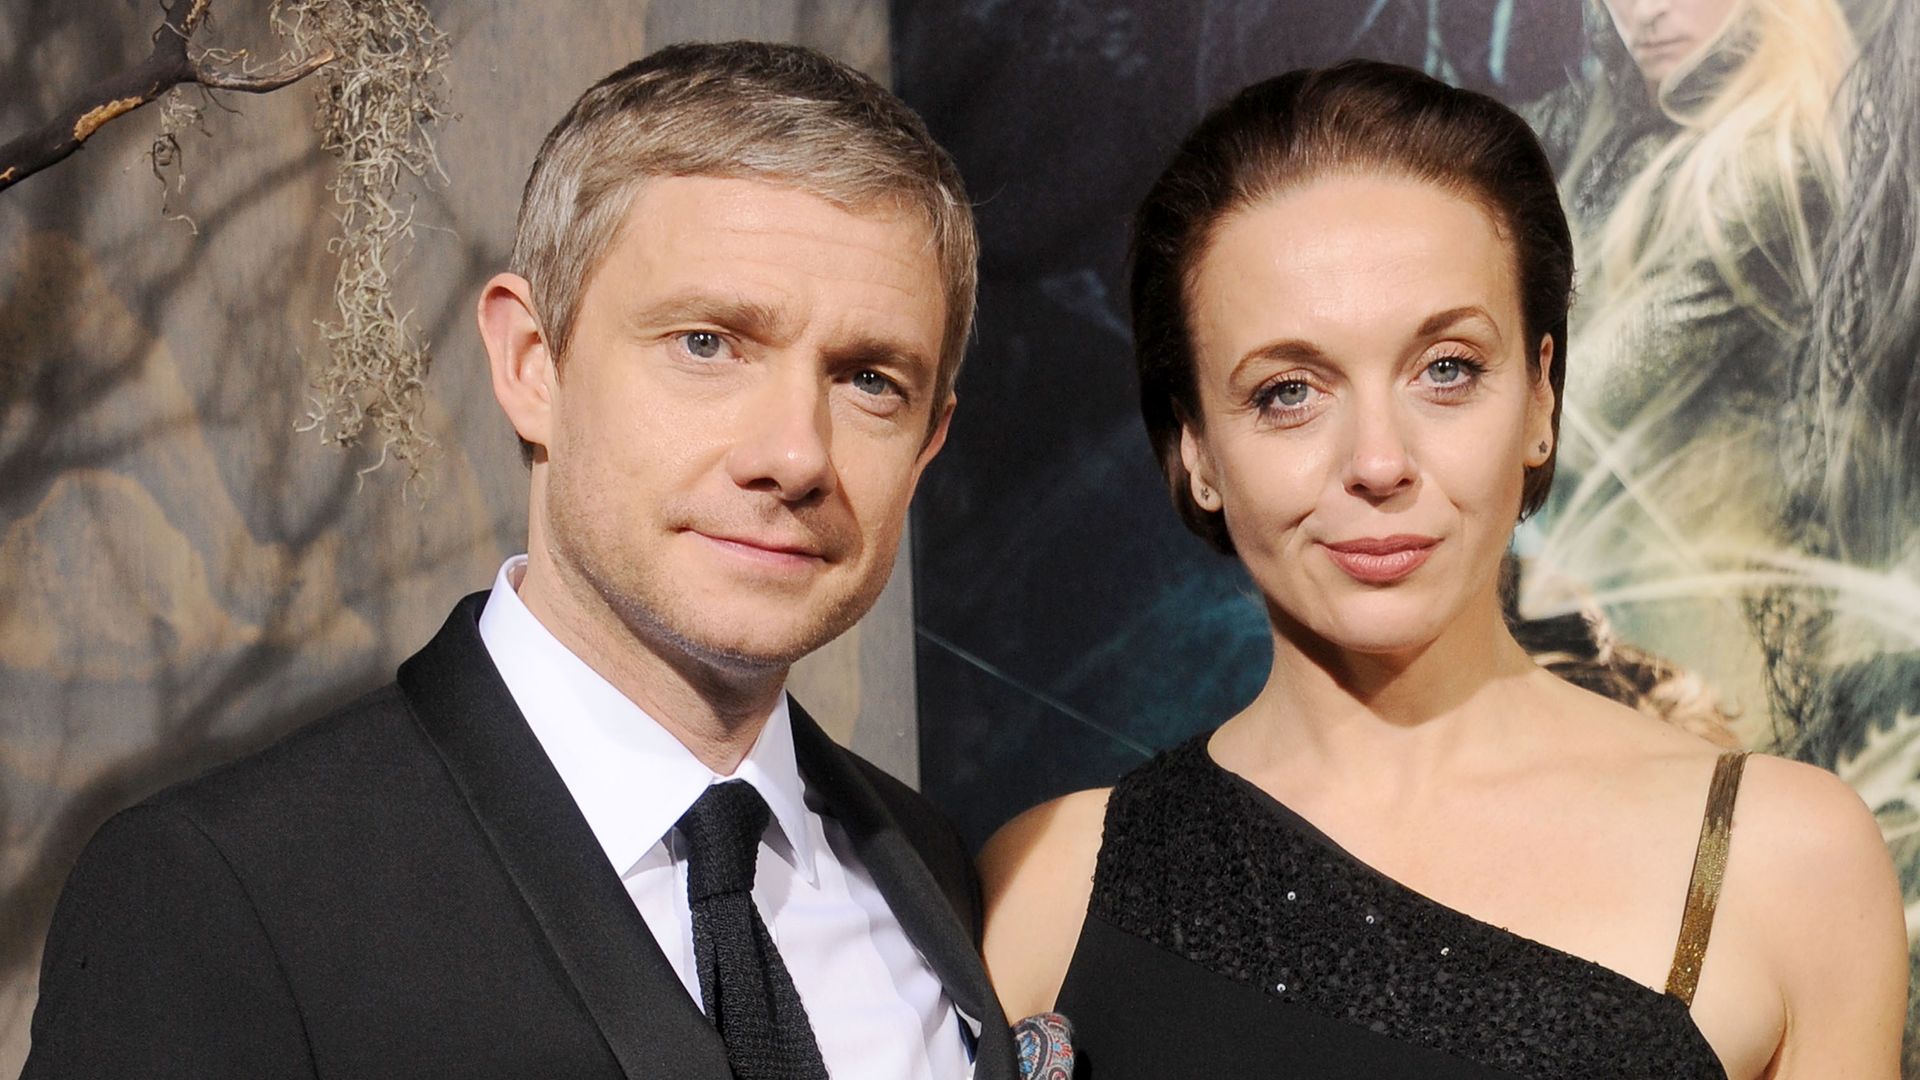 Martin Freeman and Amanda Abbington arrive at the Los Angeles premiere of "The Hobbit: The Desolation Of Smaug" on December 2, 2013